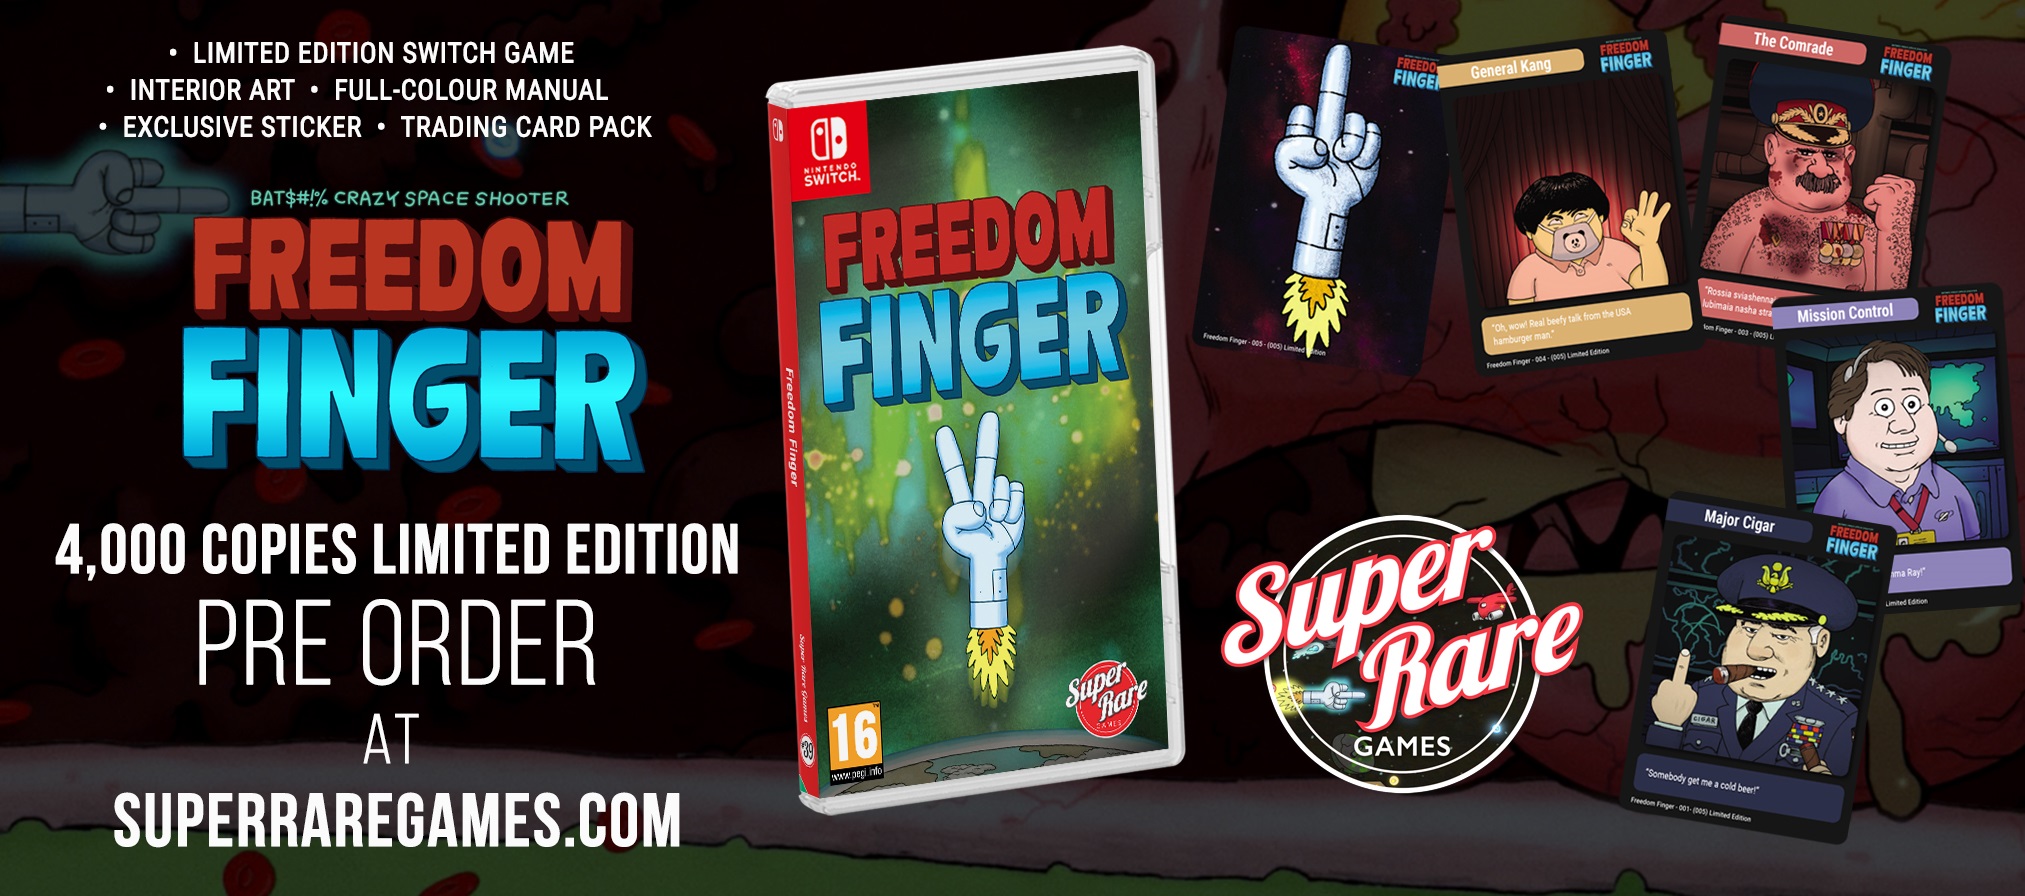 Contest Freedom Finger Super Rare Games gagne Switch